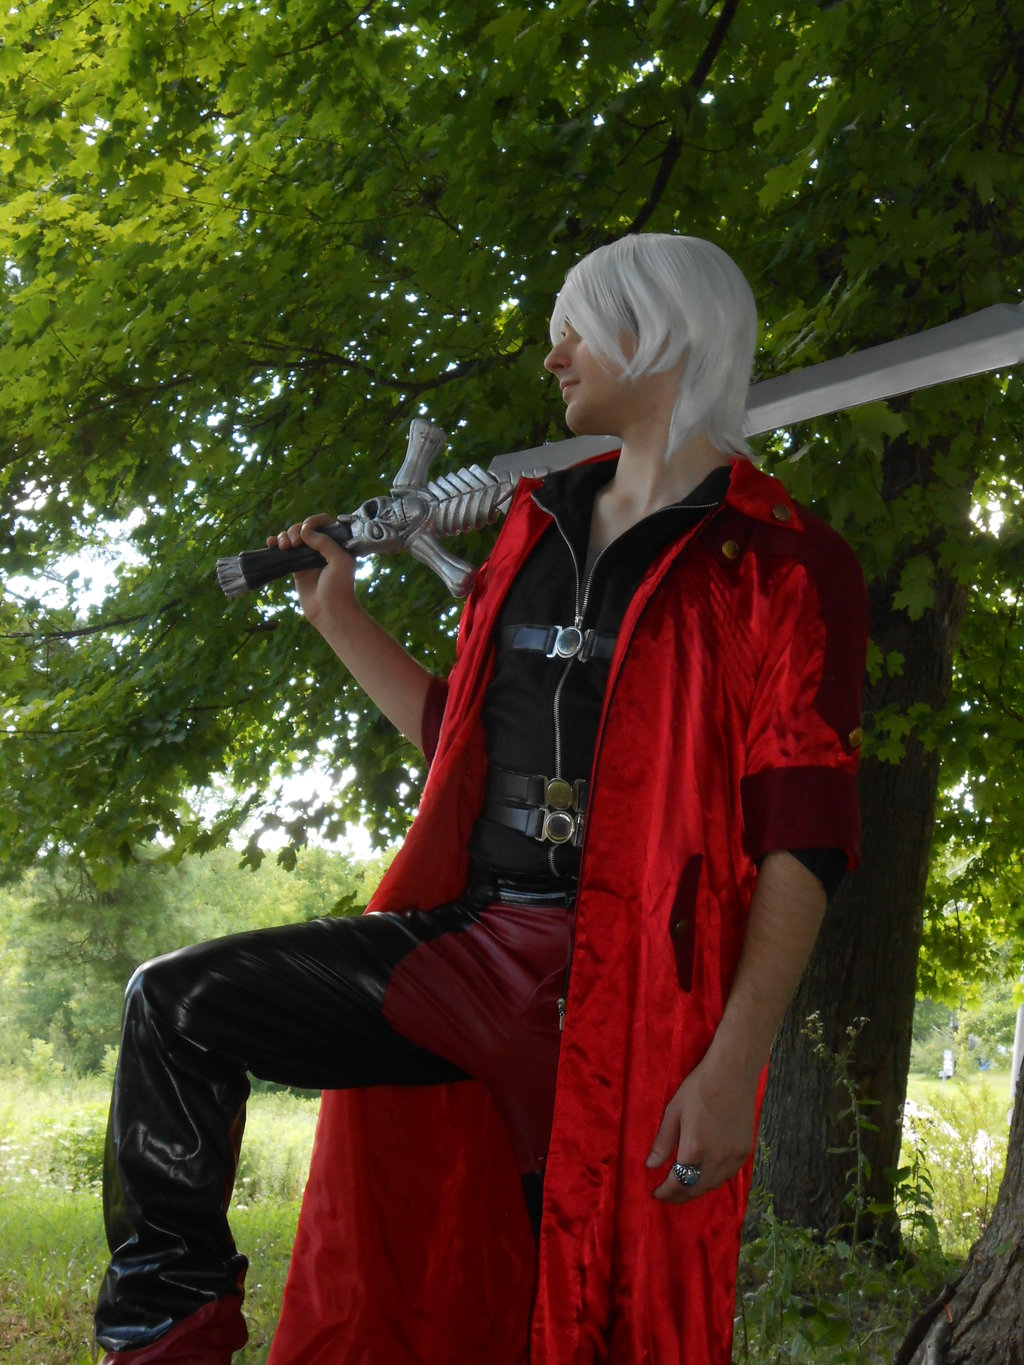 Sultry Dante Devils May Cry Cosplay by DallyDANTE